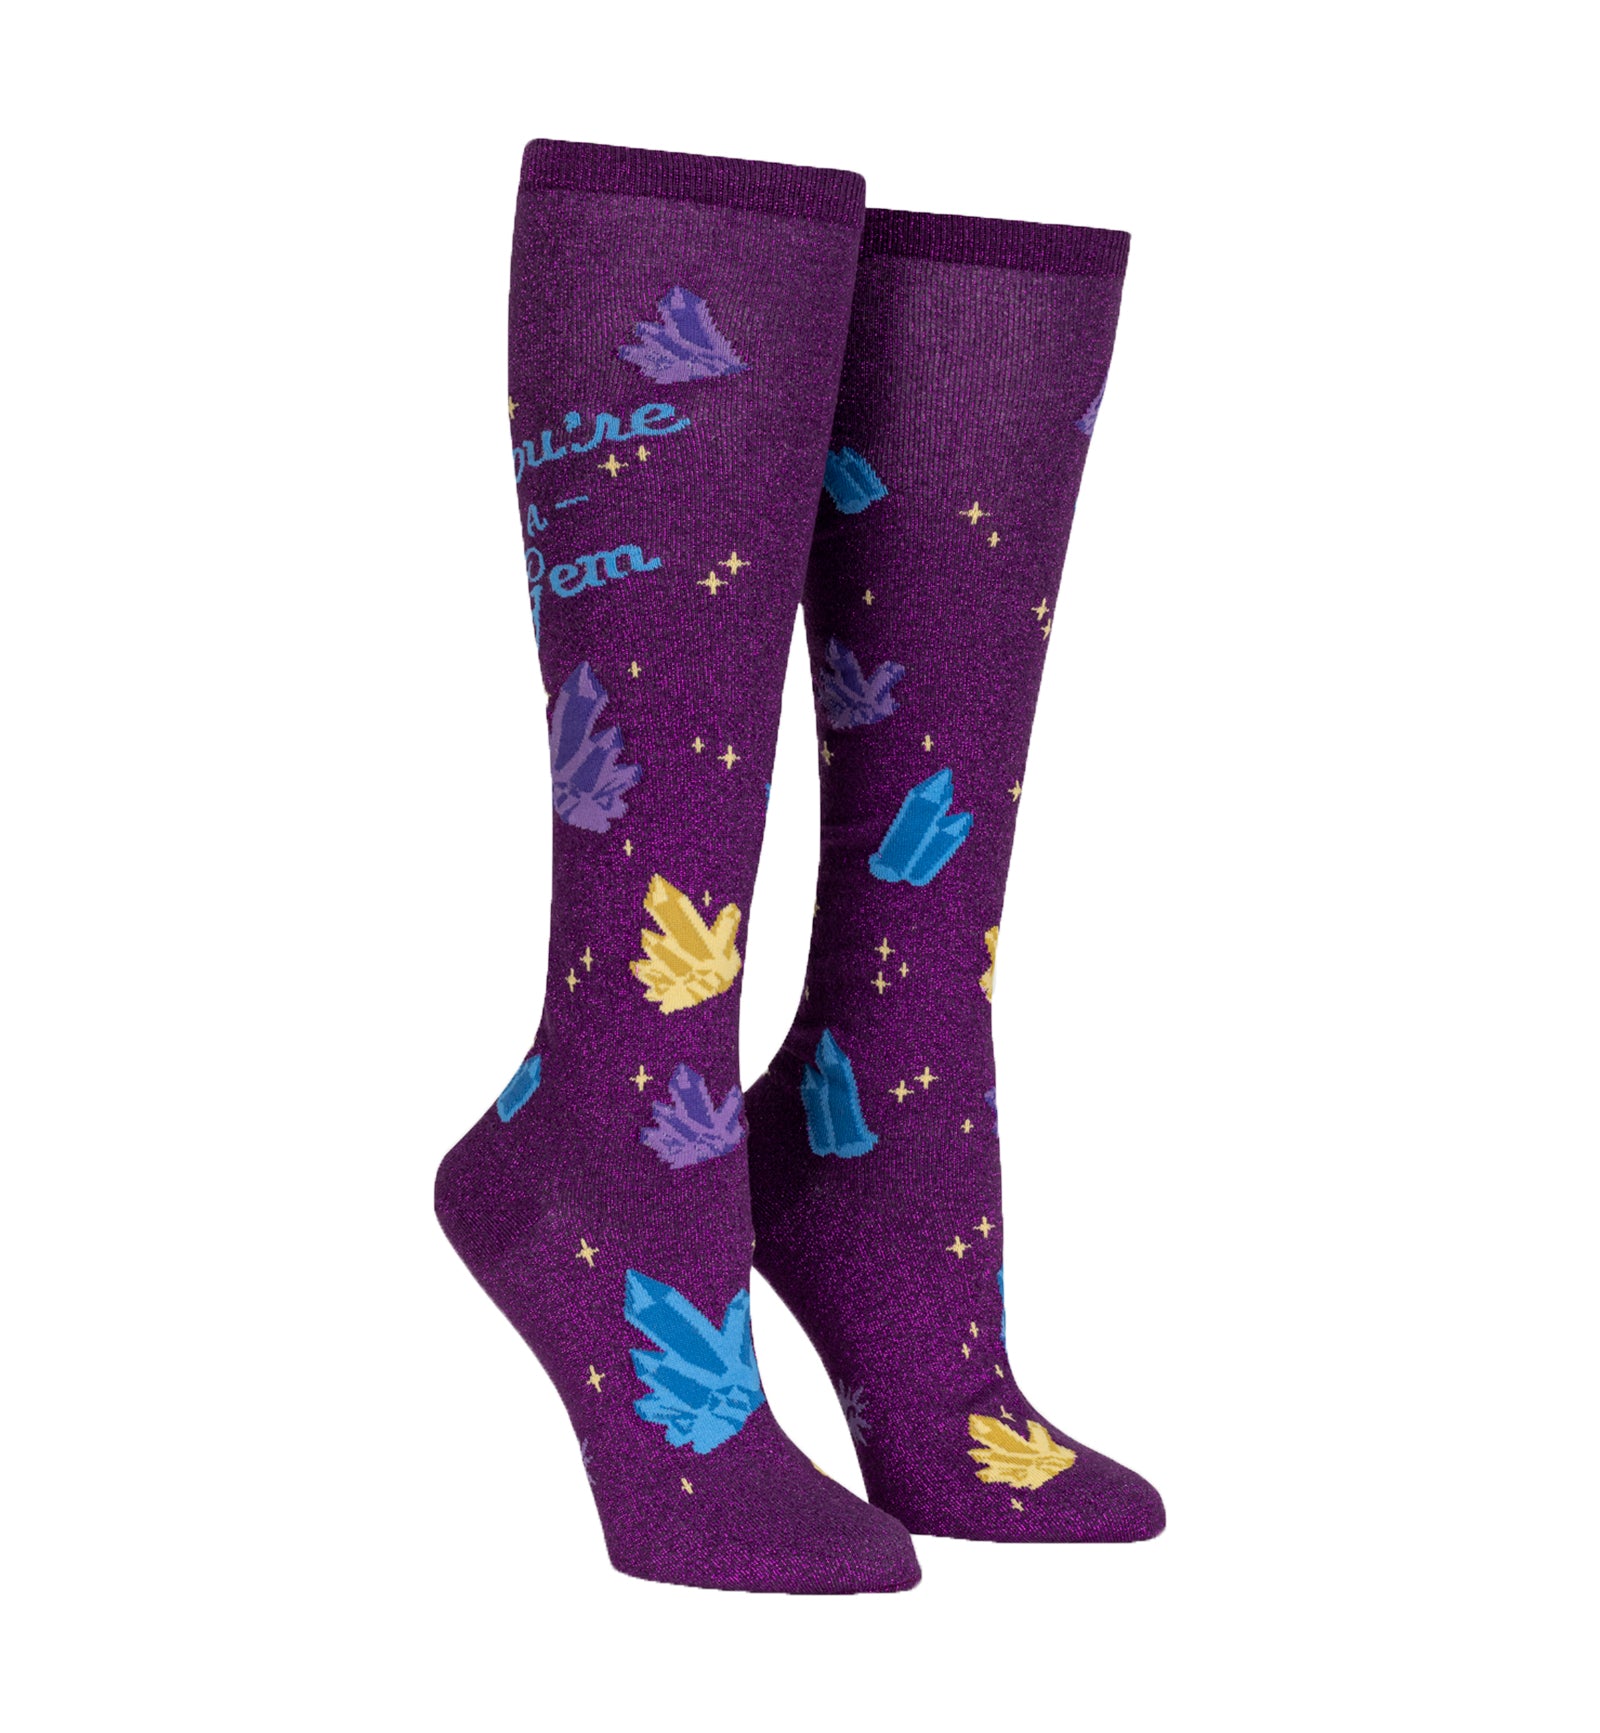 SOCK it to me Unisex Knee High Socks (F0637),You're a Gem - You're a Gem,One Size